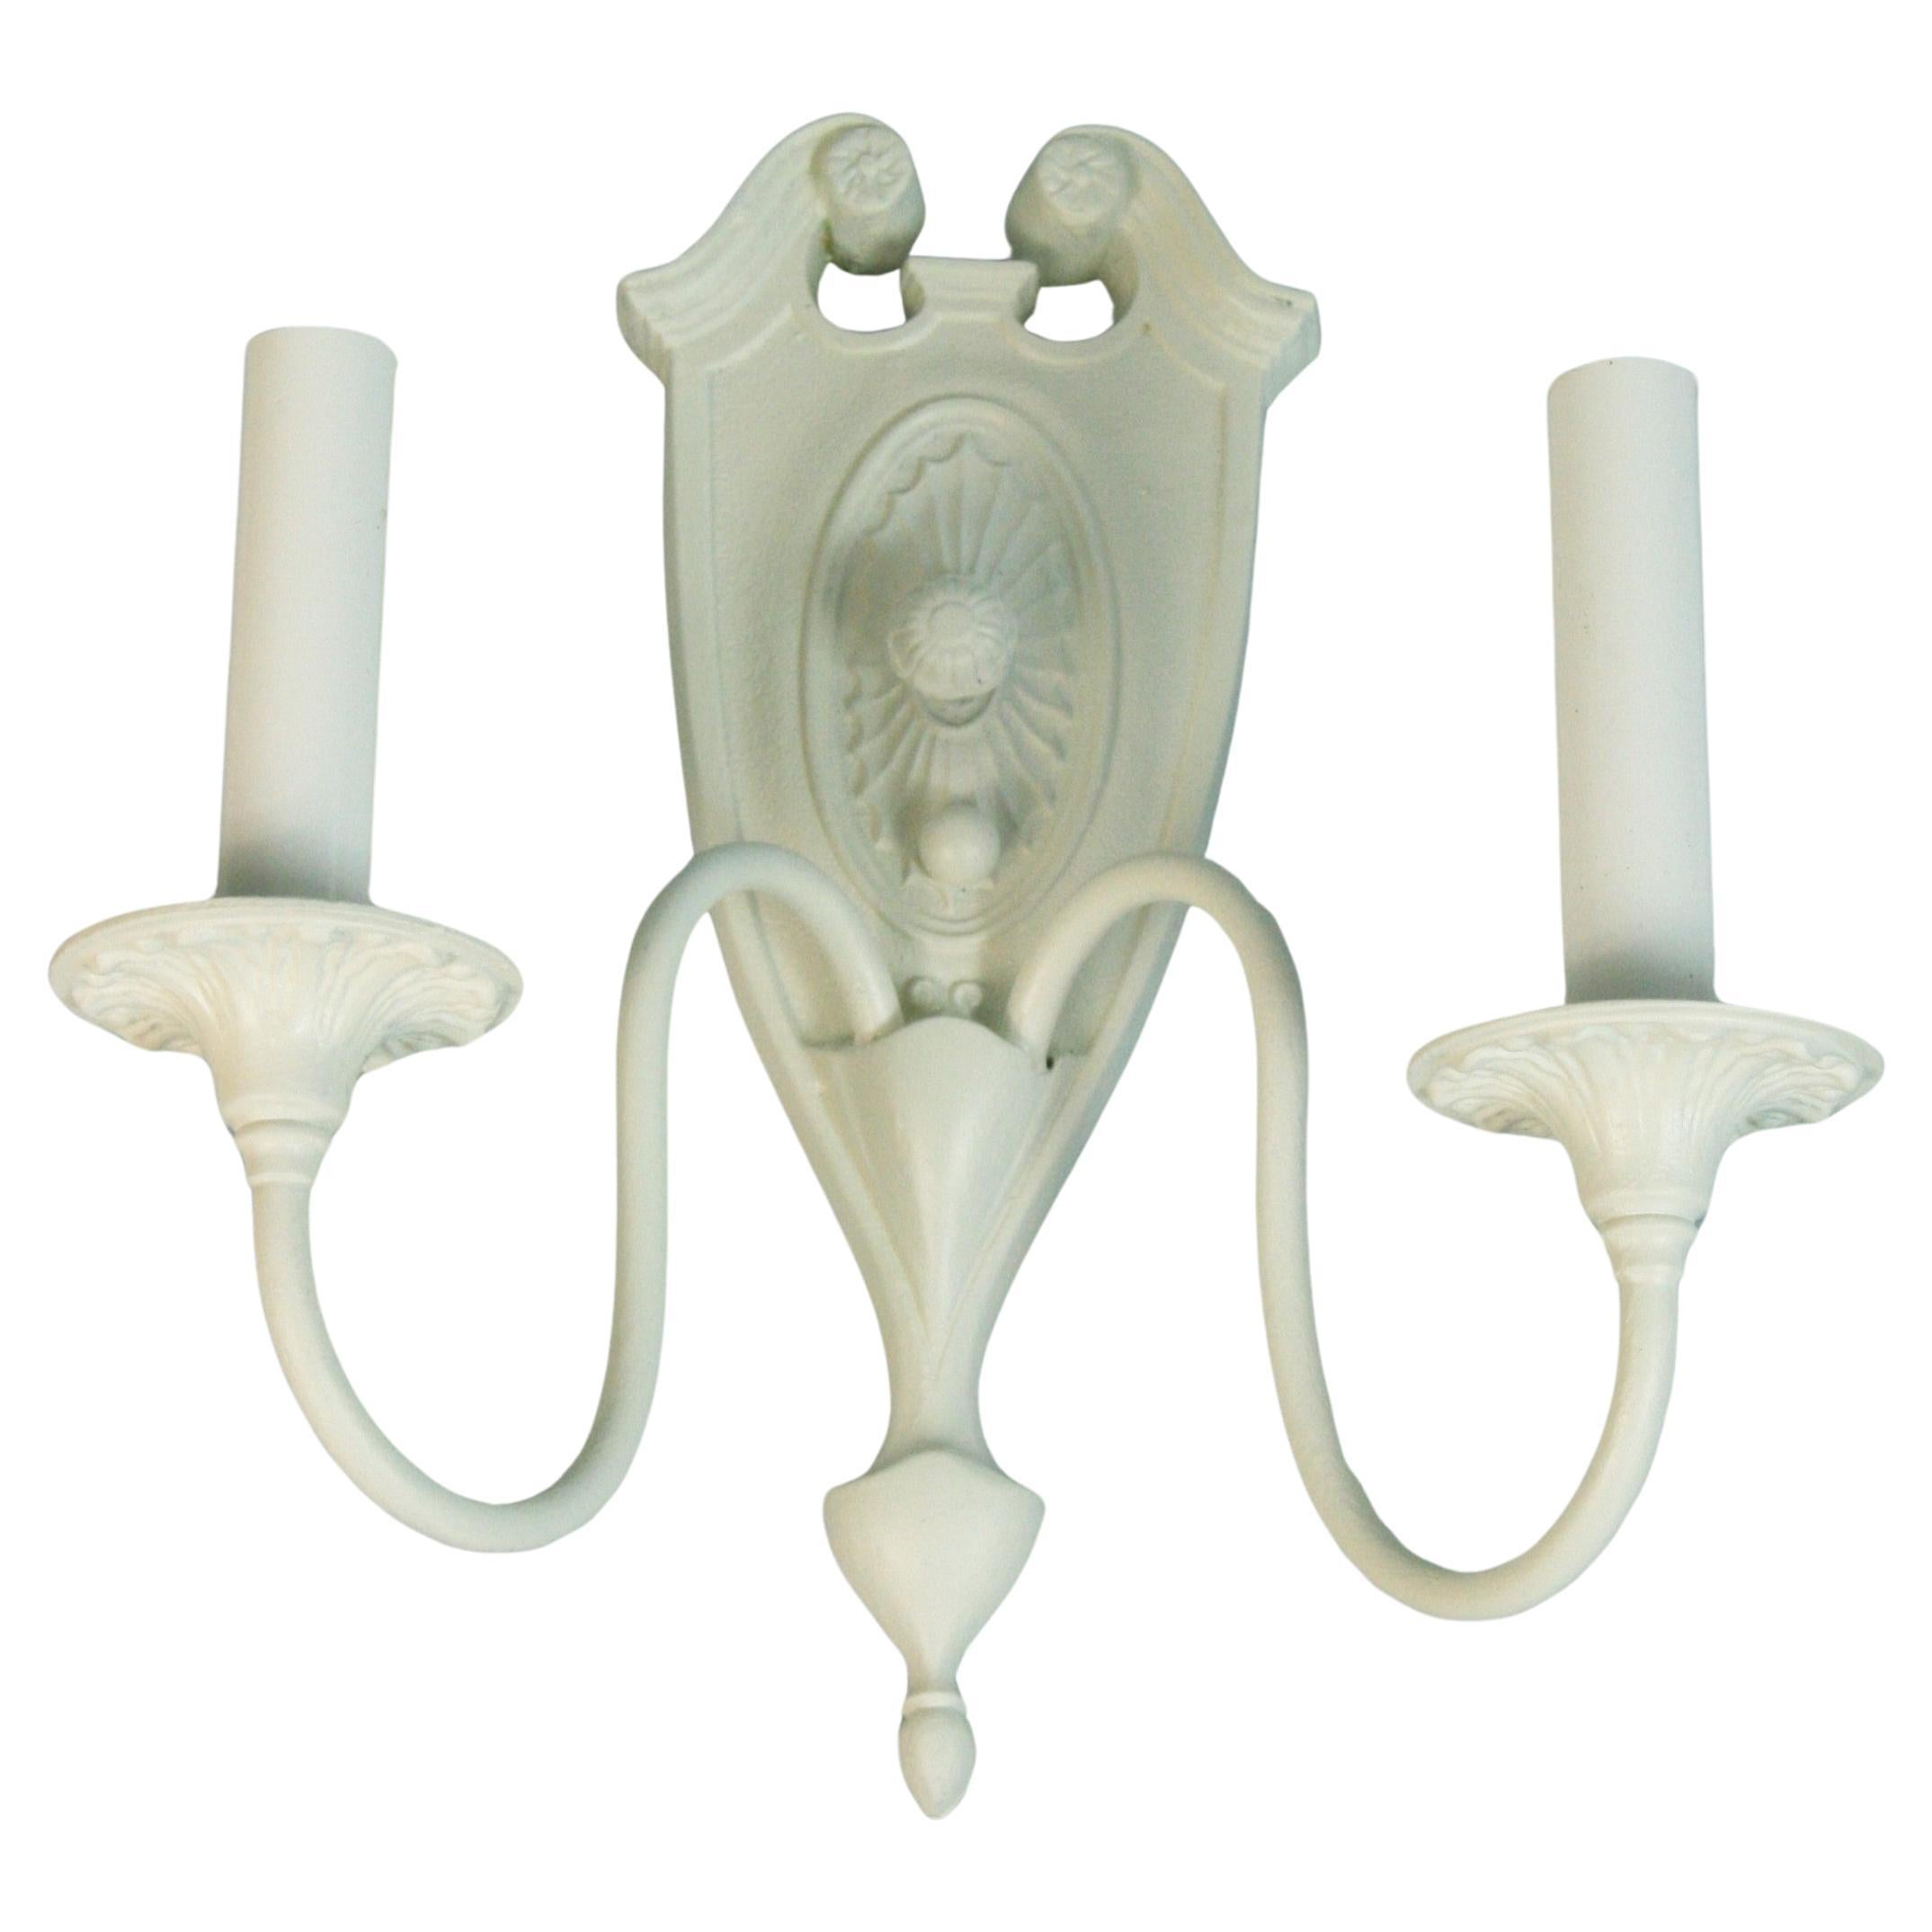 Antique Bronze Pediment Top Wall Sconces in a White Lacquer Finish a Pair 1930's For Sale